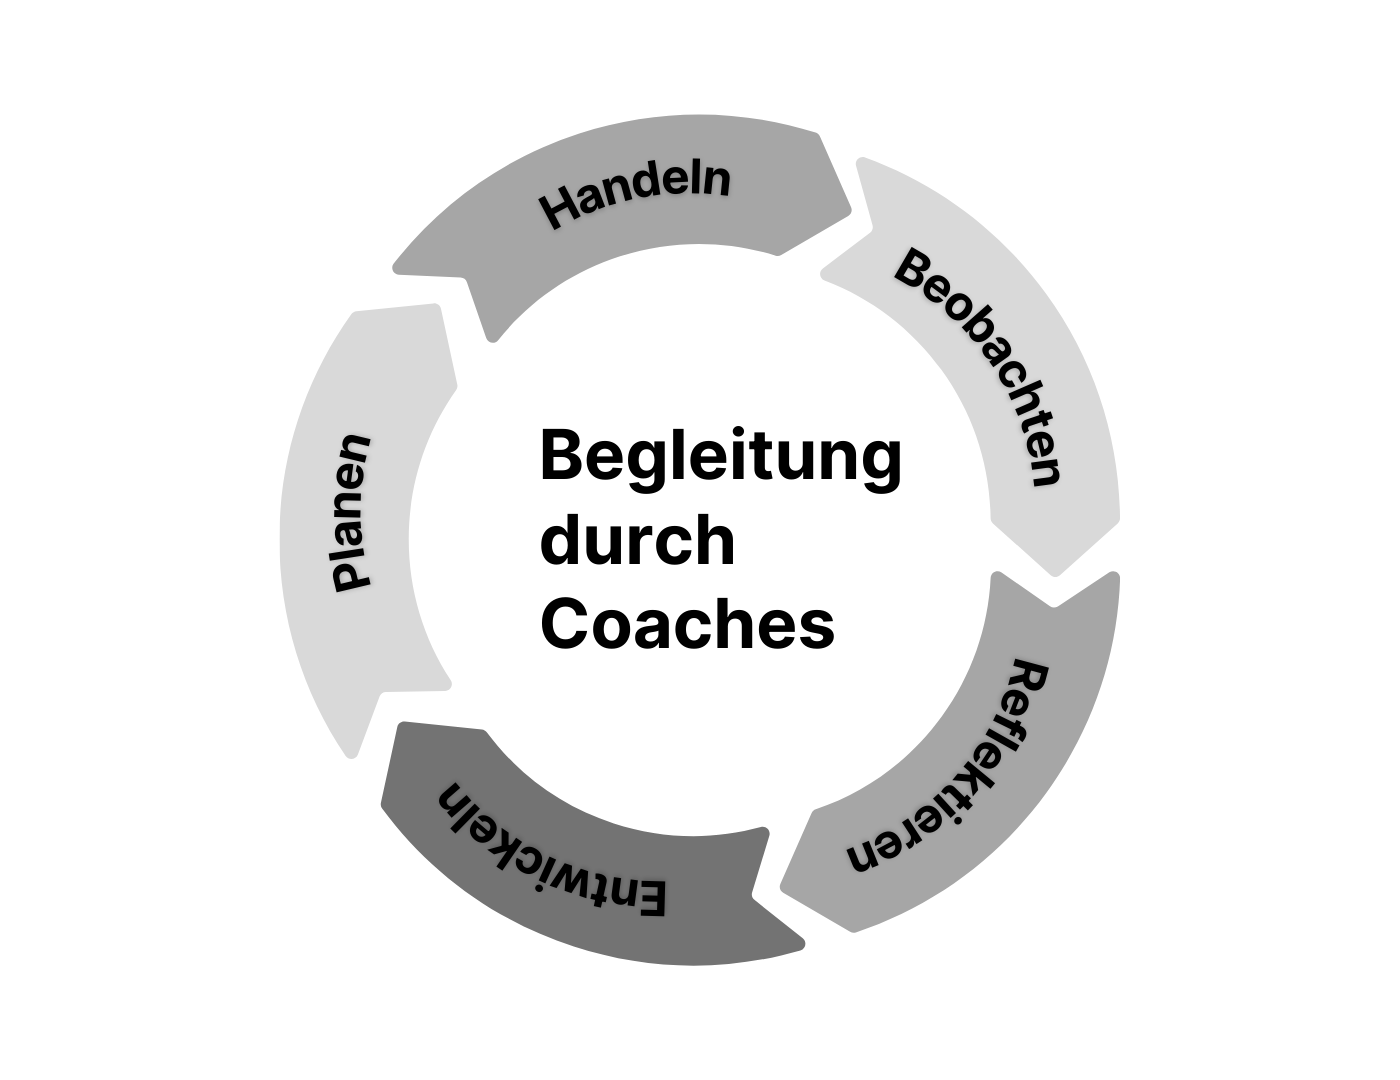 begleitung-duch-coaches-bsc-data-science-ht-fhnw.png